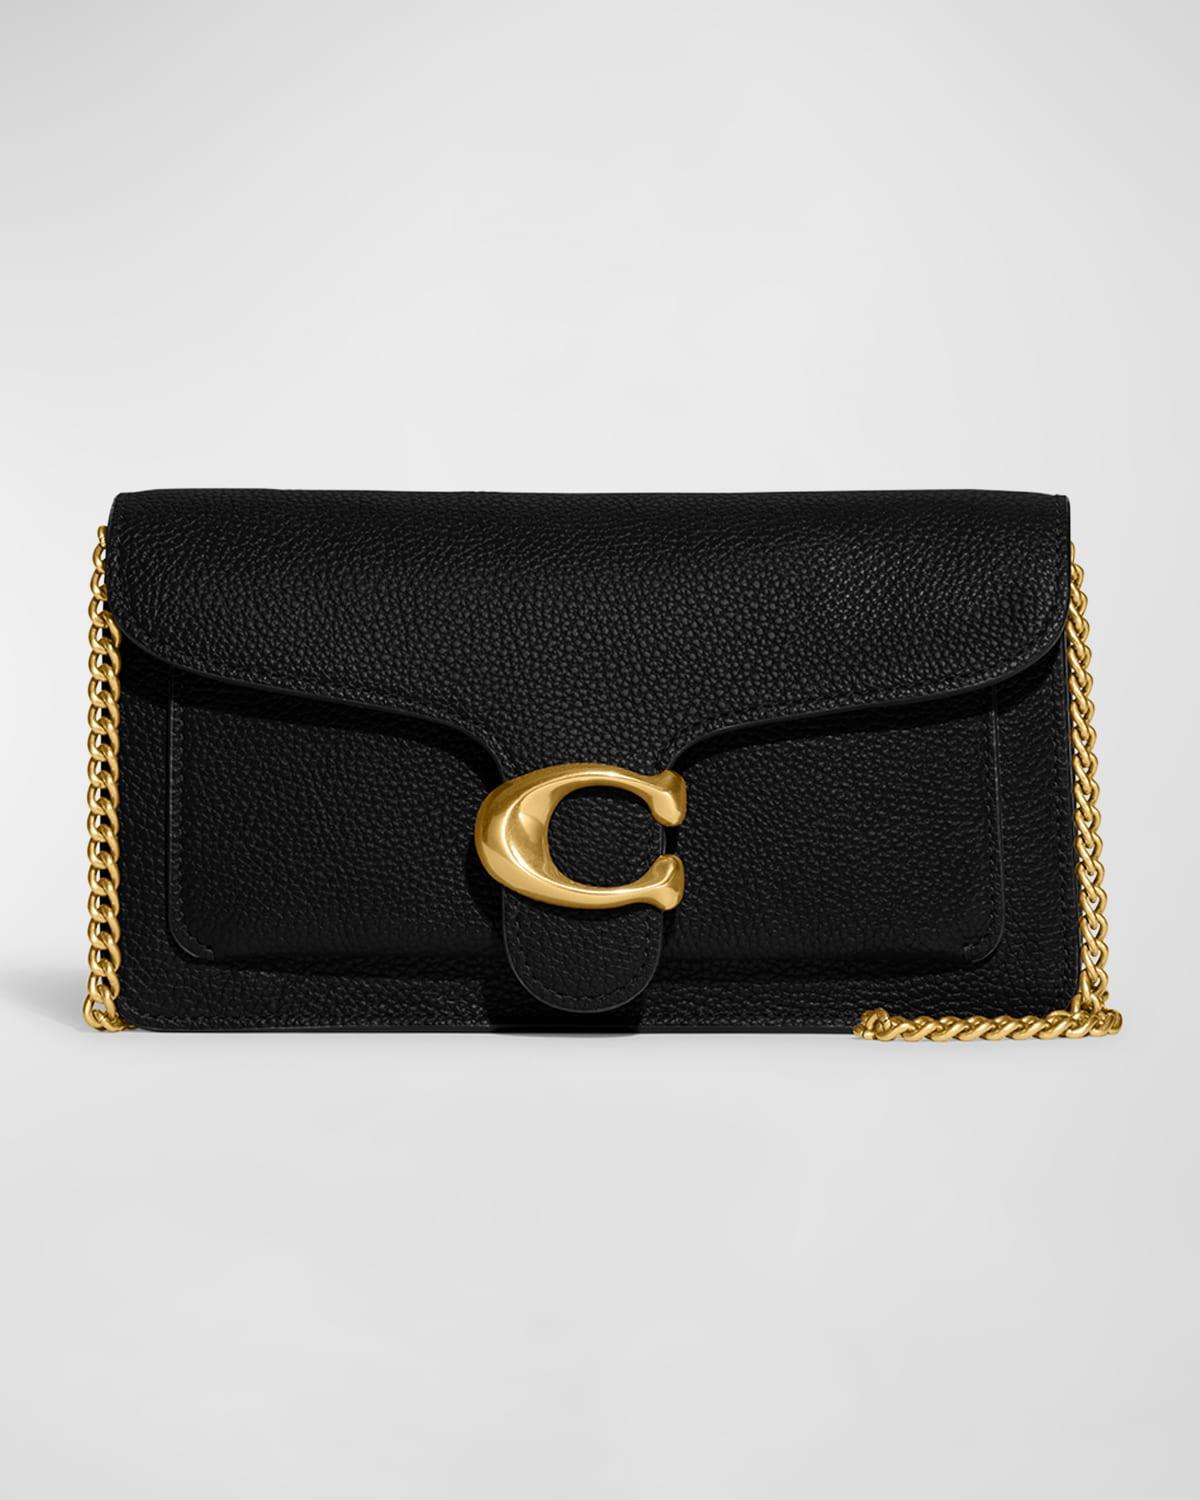 COACH Tabby Pebble Leather Shoulder Bag in Black | Lyst